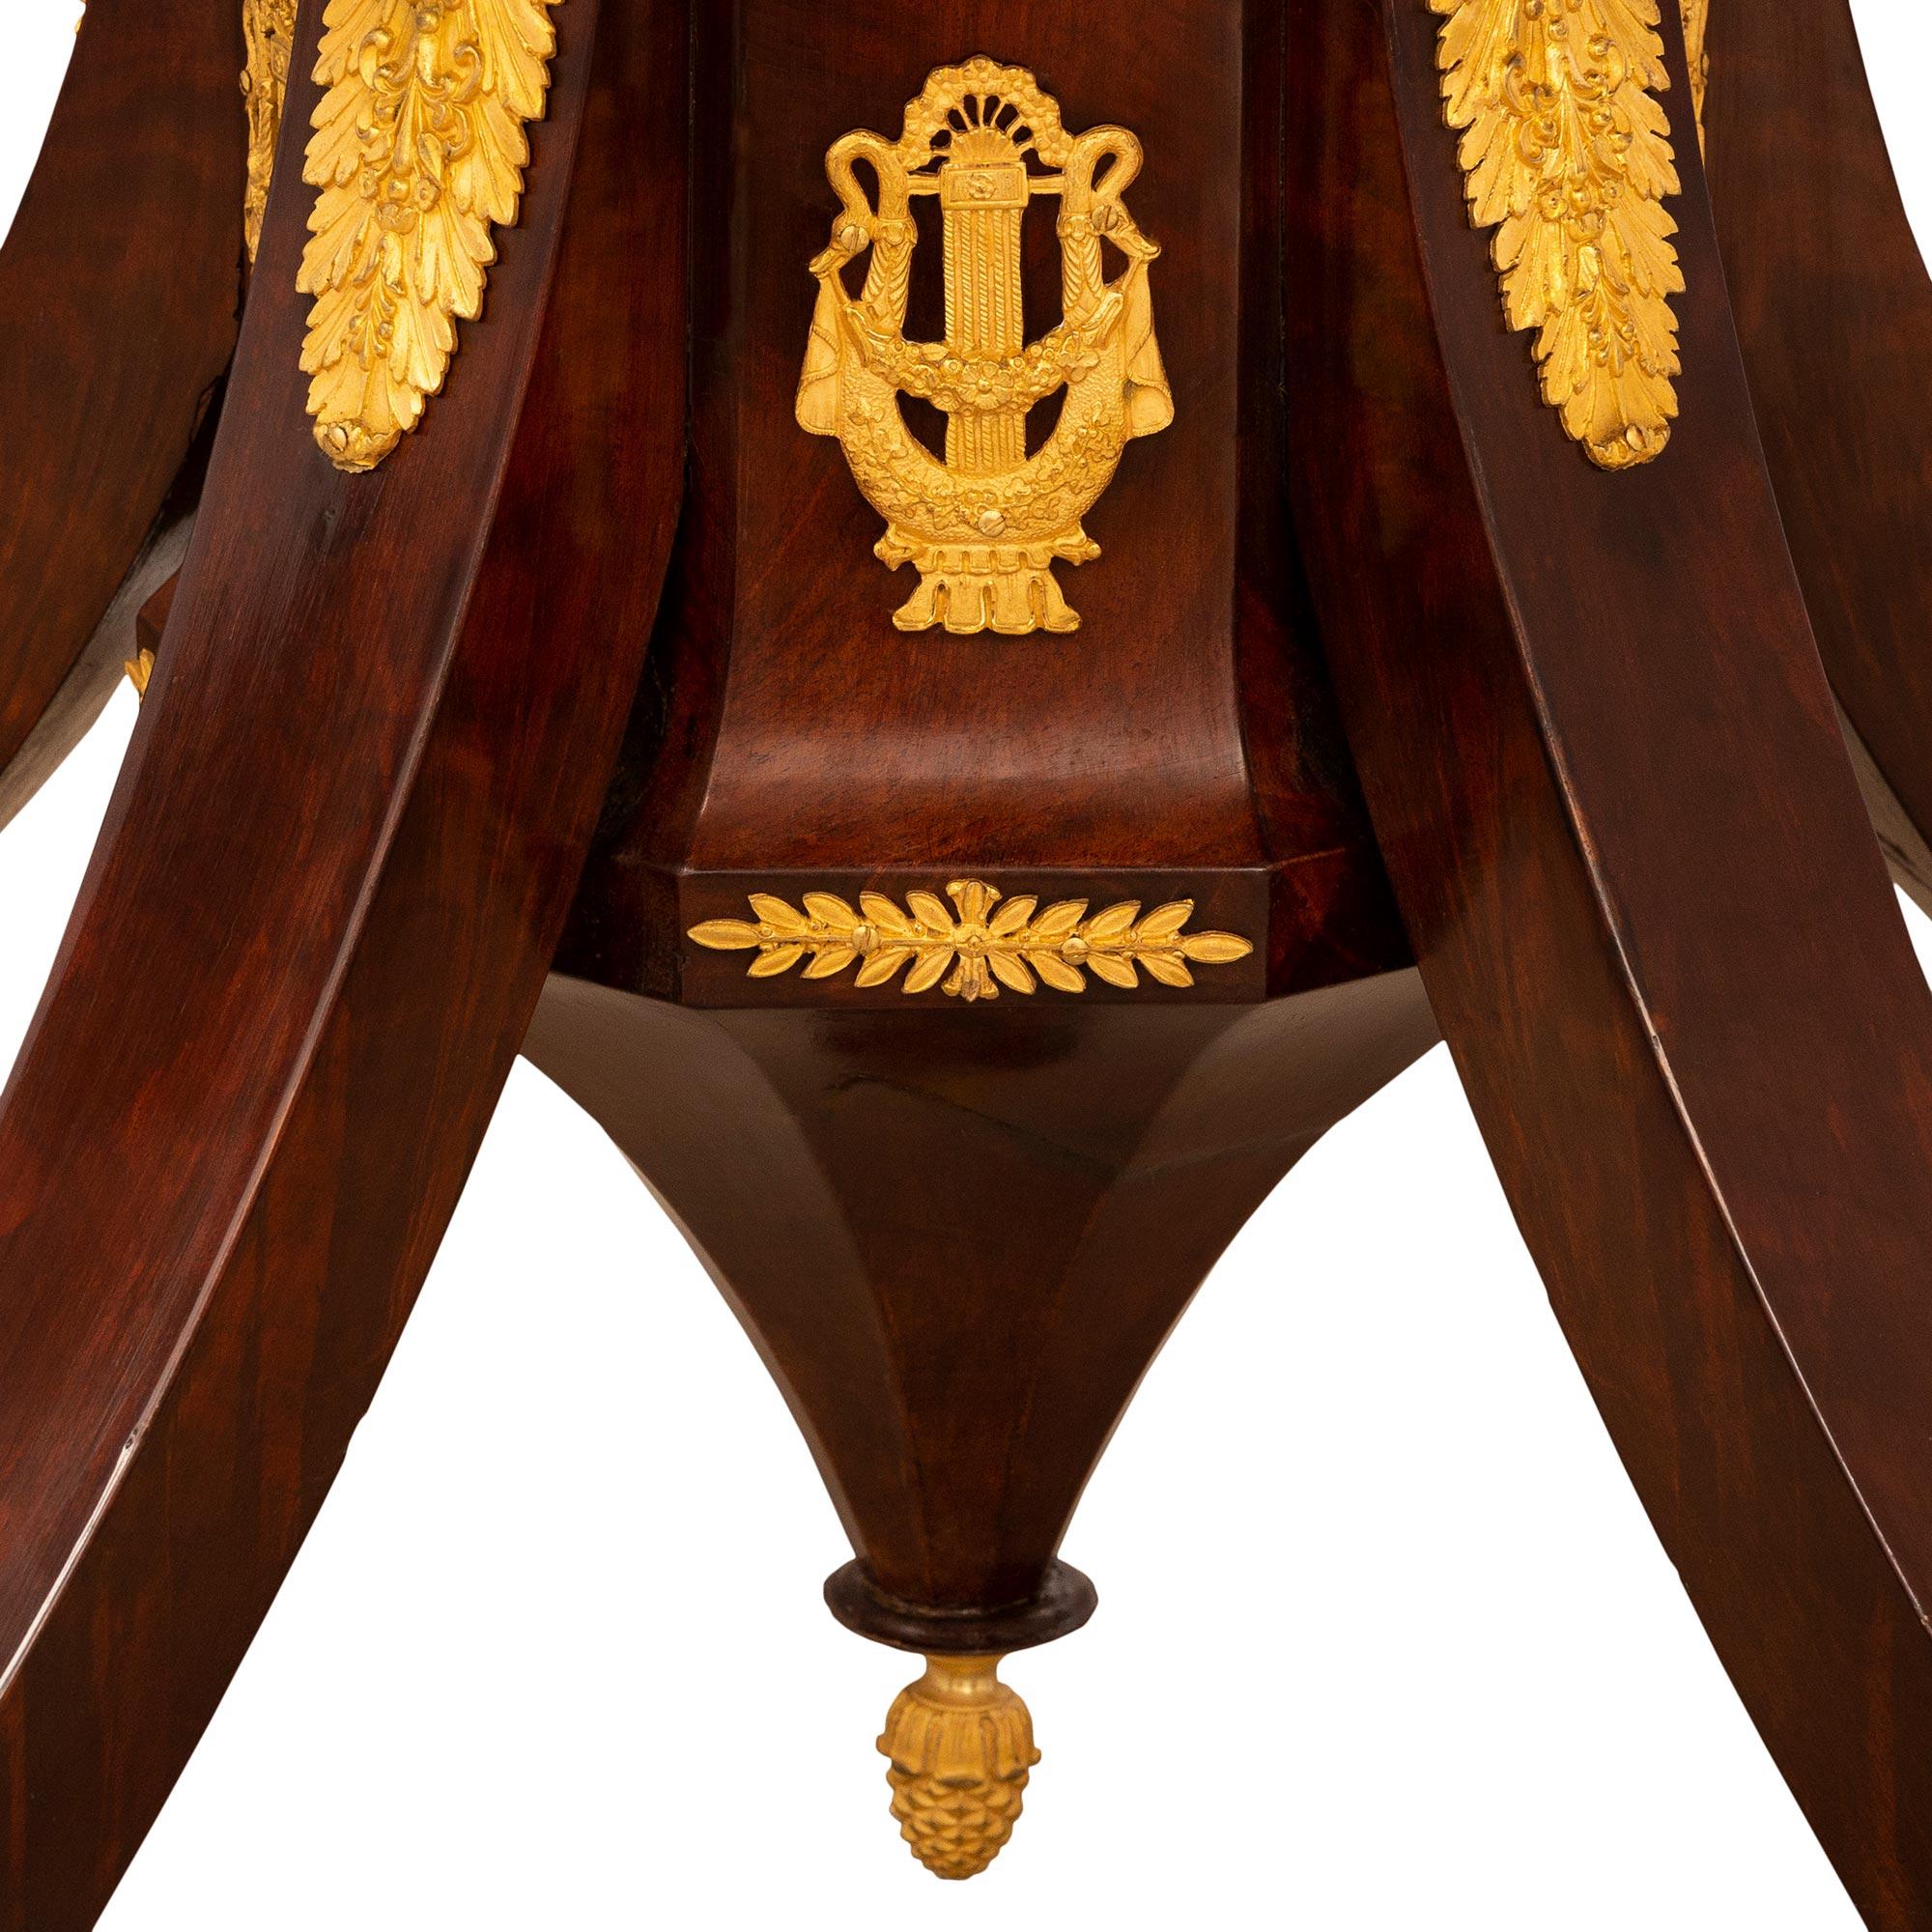 Italian 19th Century Neoclassical Empire Style Mahogany and Ormolu Center Table For Sale 5